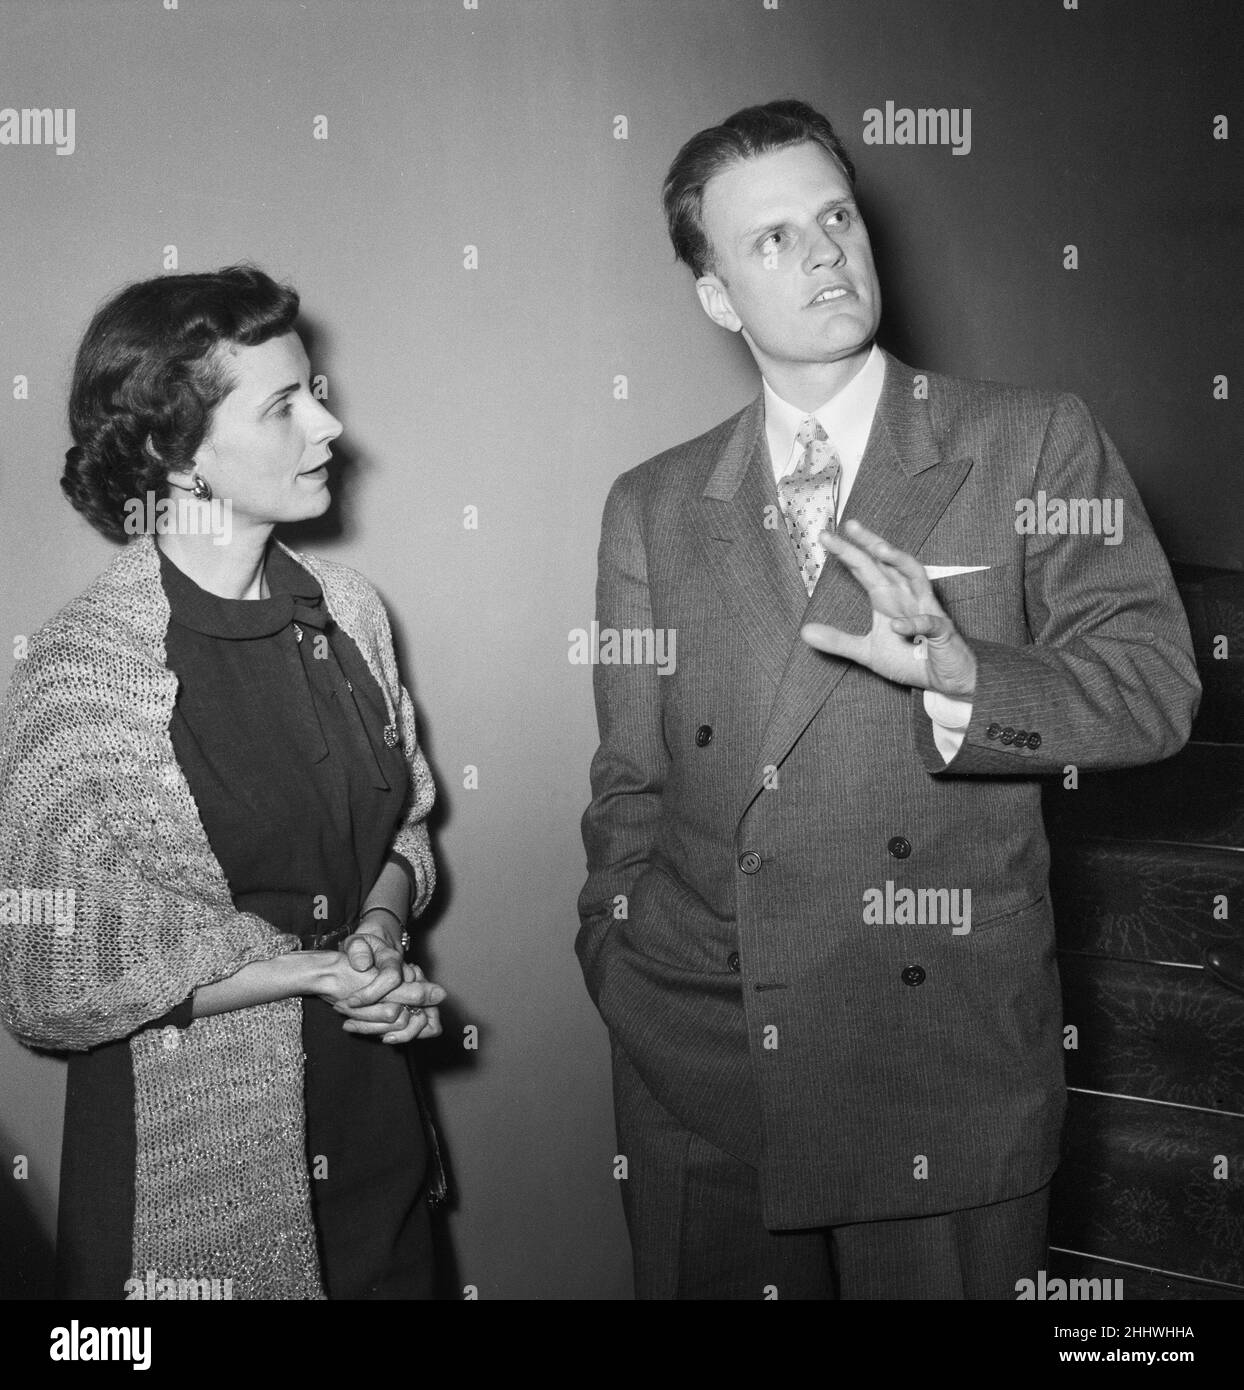 American evangelist Billy Graham with his wife Ruth at the Central Hall in Westminster, London where he addressed a press conference at the start of his there month London crusade.  25th February 1954. Stock Photo